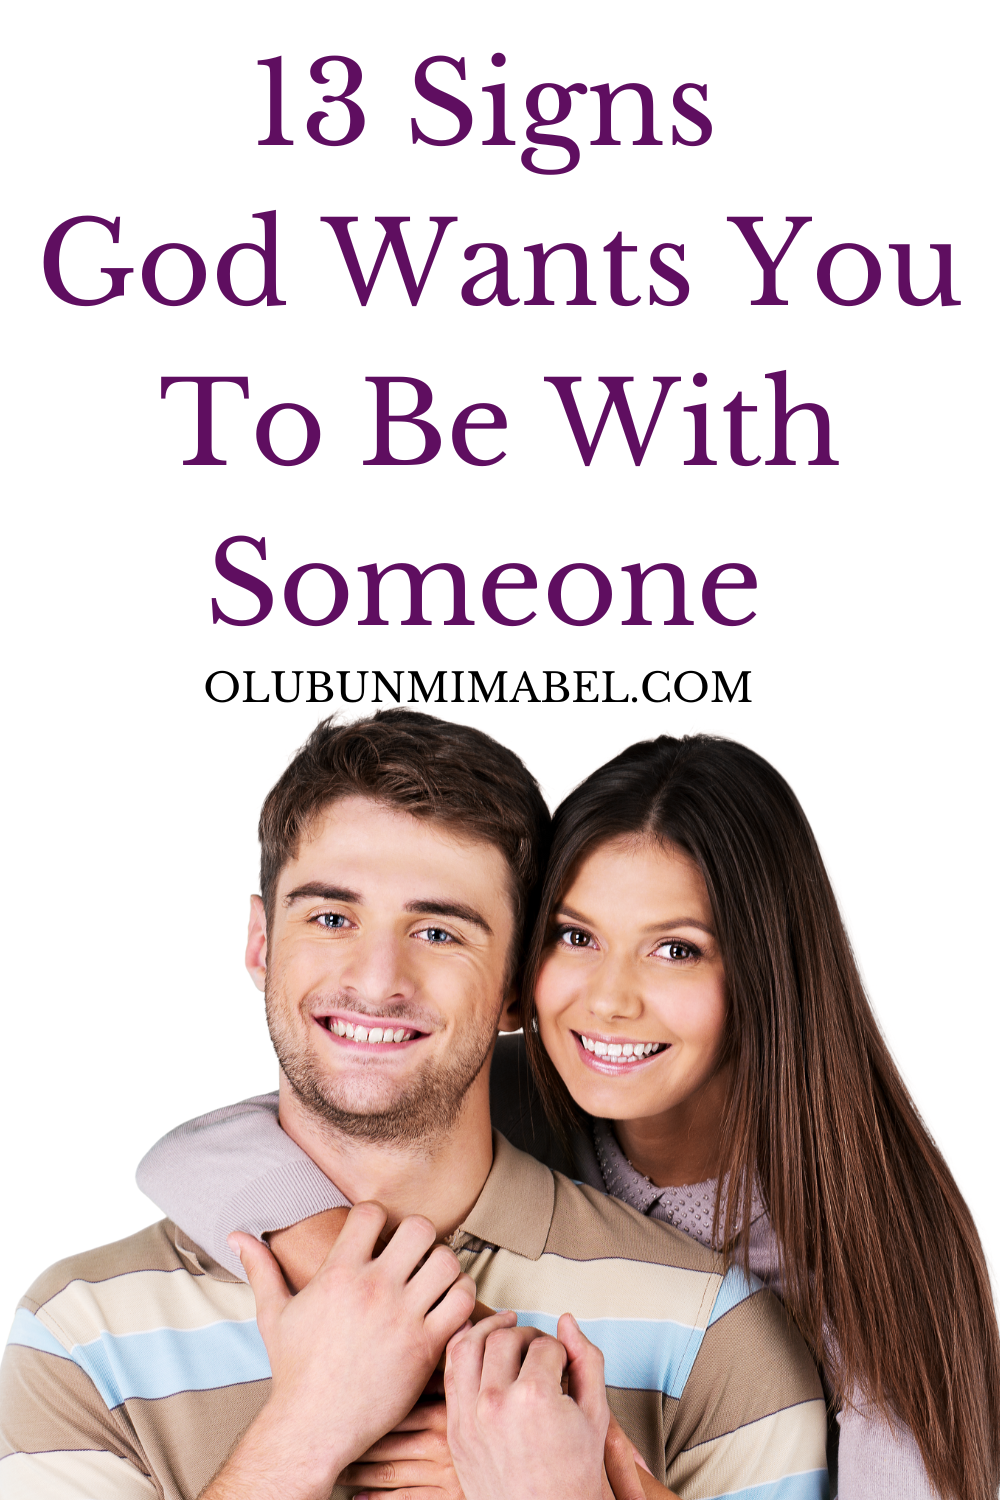 Signs God Wants You To Be With Someone